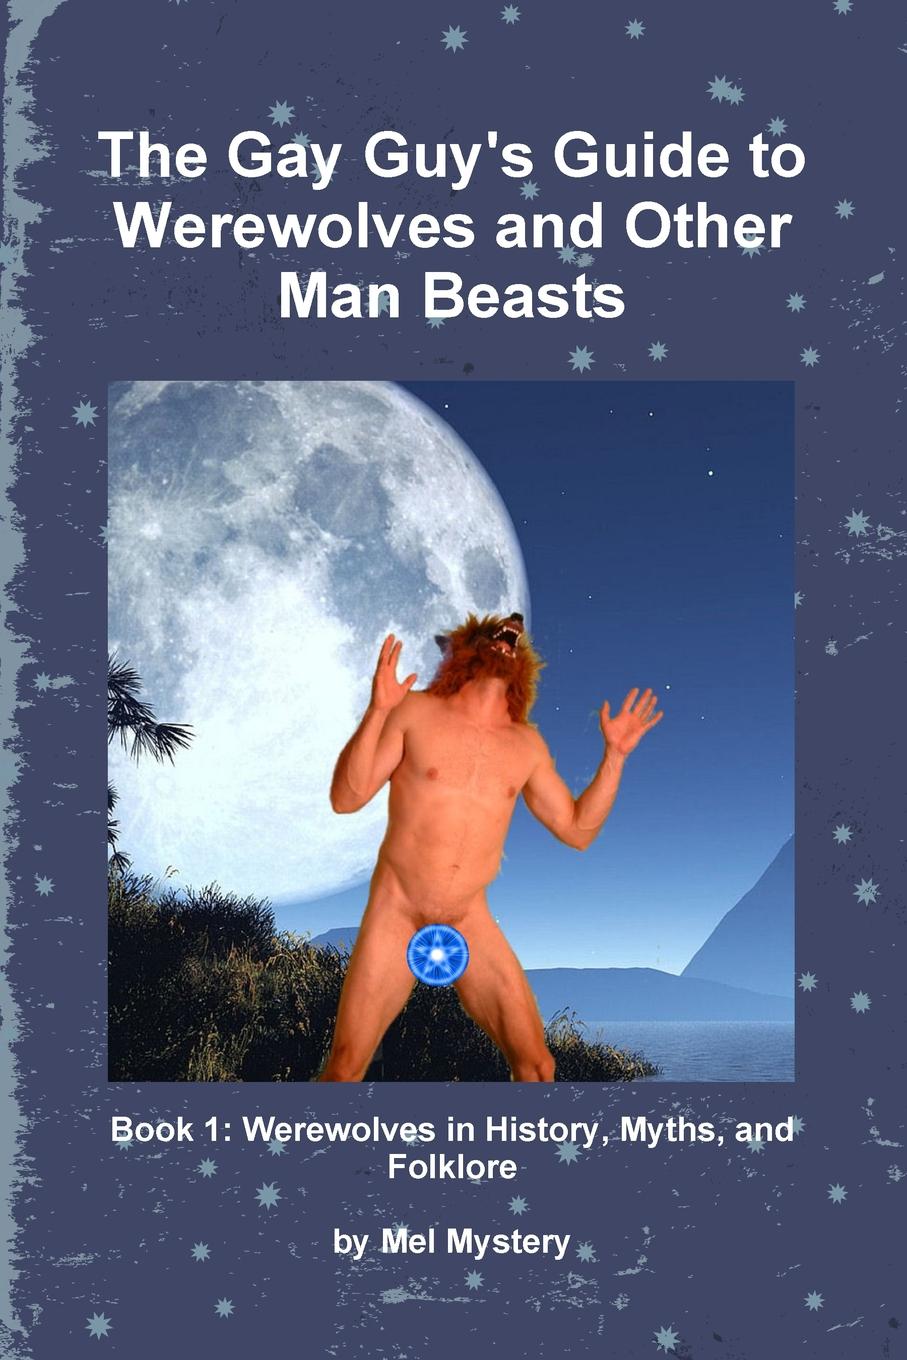 The Gay Guy.s Guide to Werewolves and Other Man Beasts. Book 1